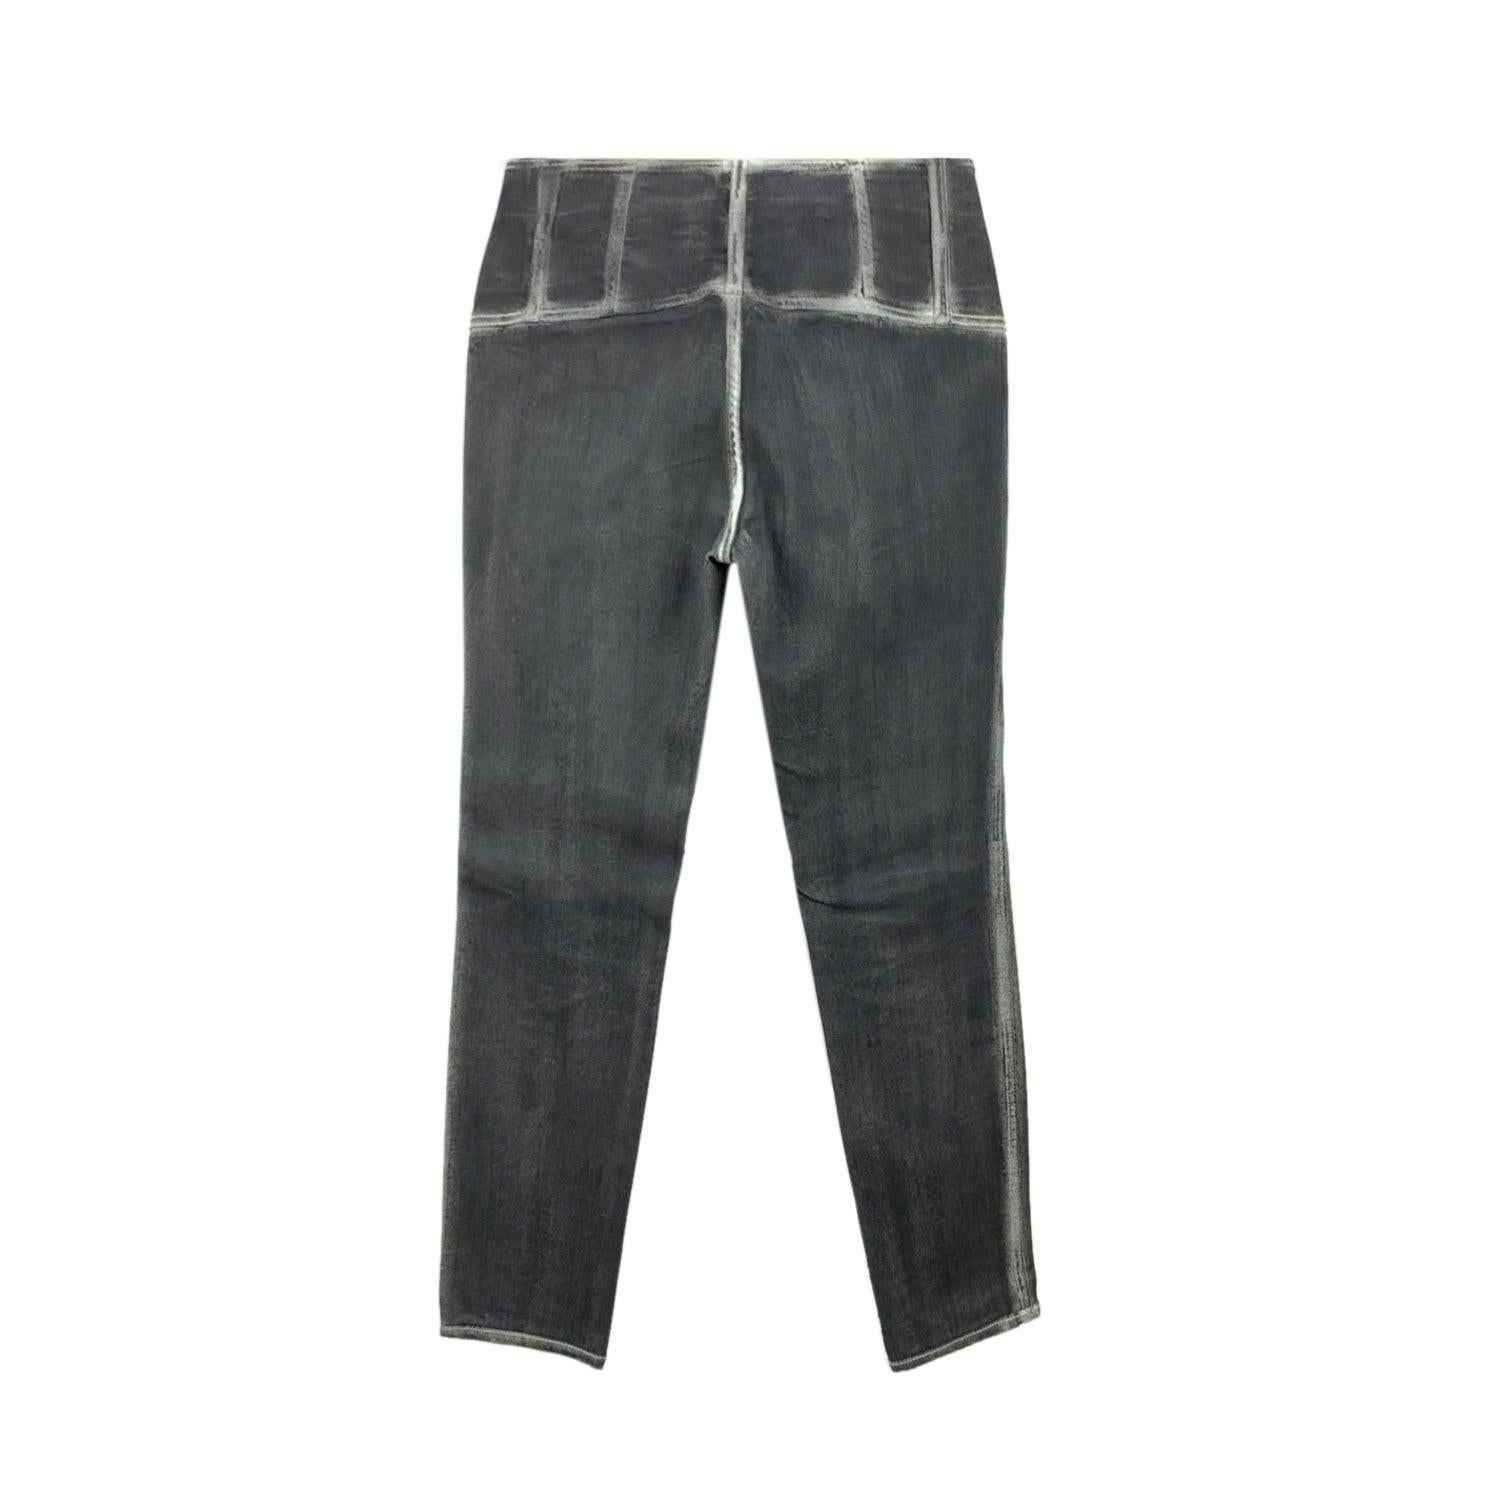 Chanel grey washed out denim jeans. It features belt loops, button and zip closure on the front and skinny design. Designed button. Composition: 98% cotton, 2% elastane. Size 38 FR (it should correspond to a SMALL size) Details MATERIAL: Denim -